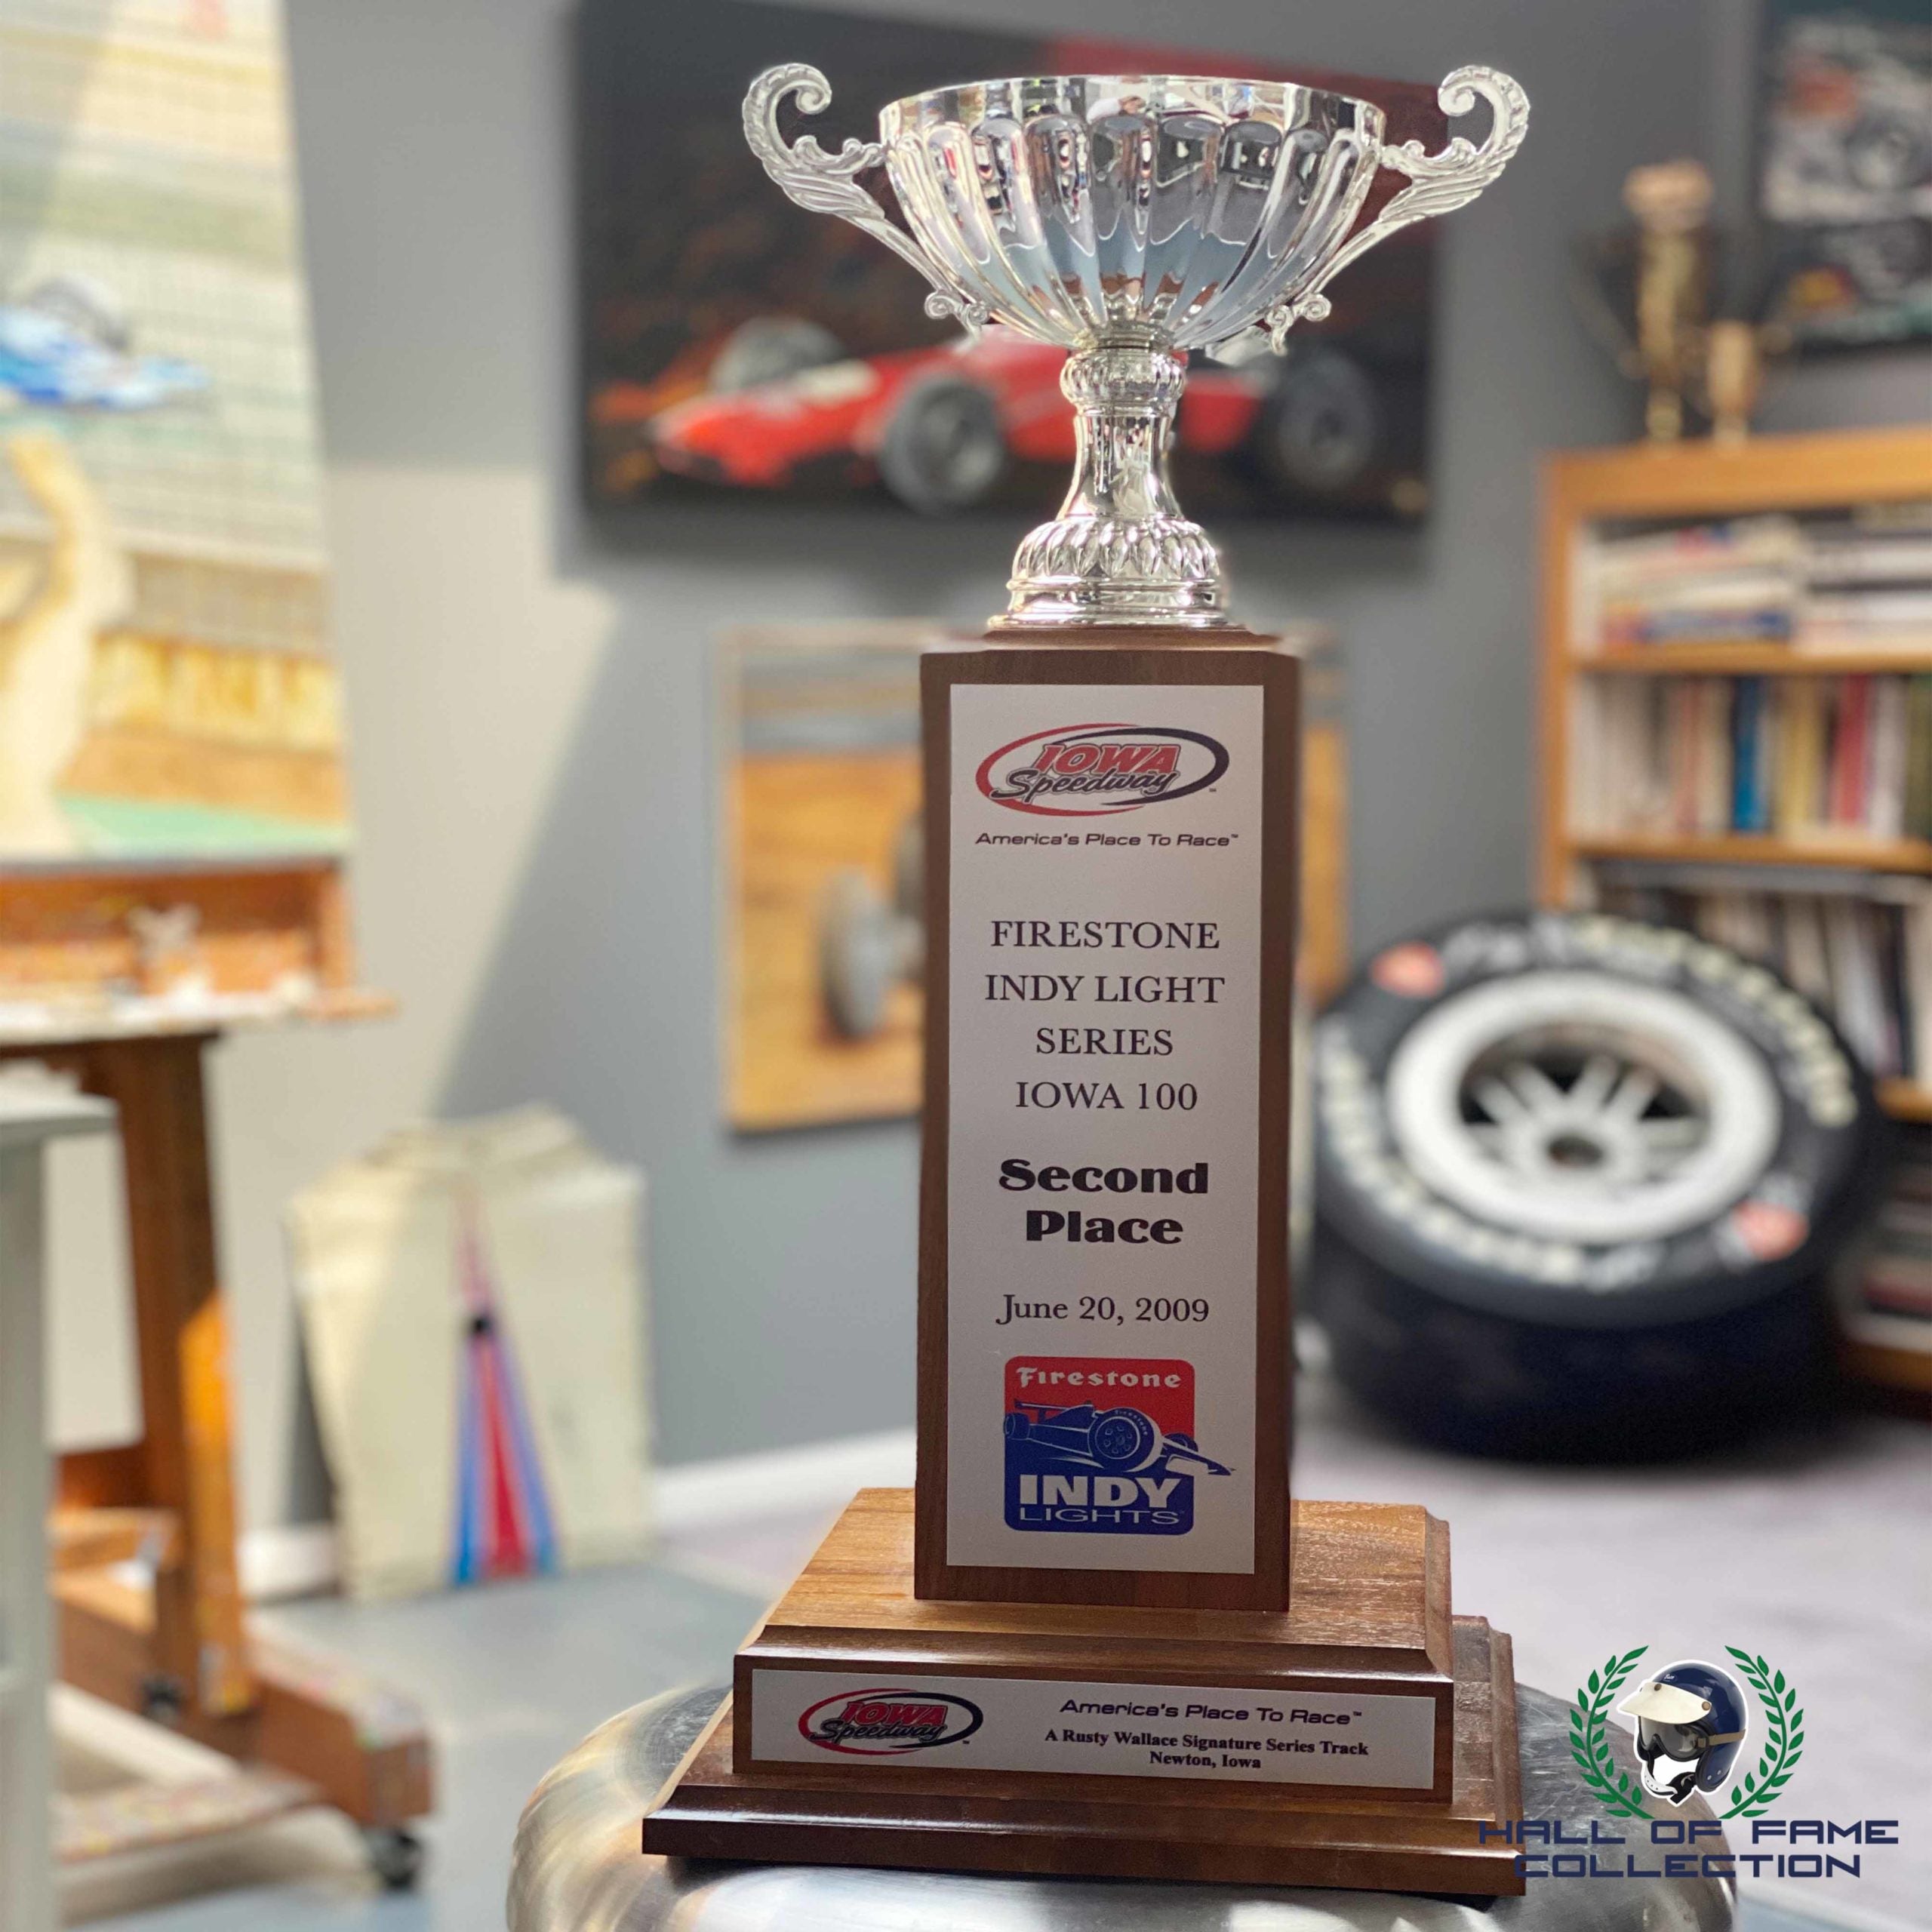 2009 Wade Cunningham Iowa 100 2nd Place Indy Lights Trophy